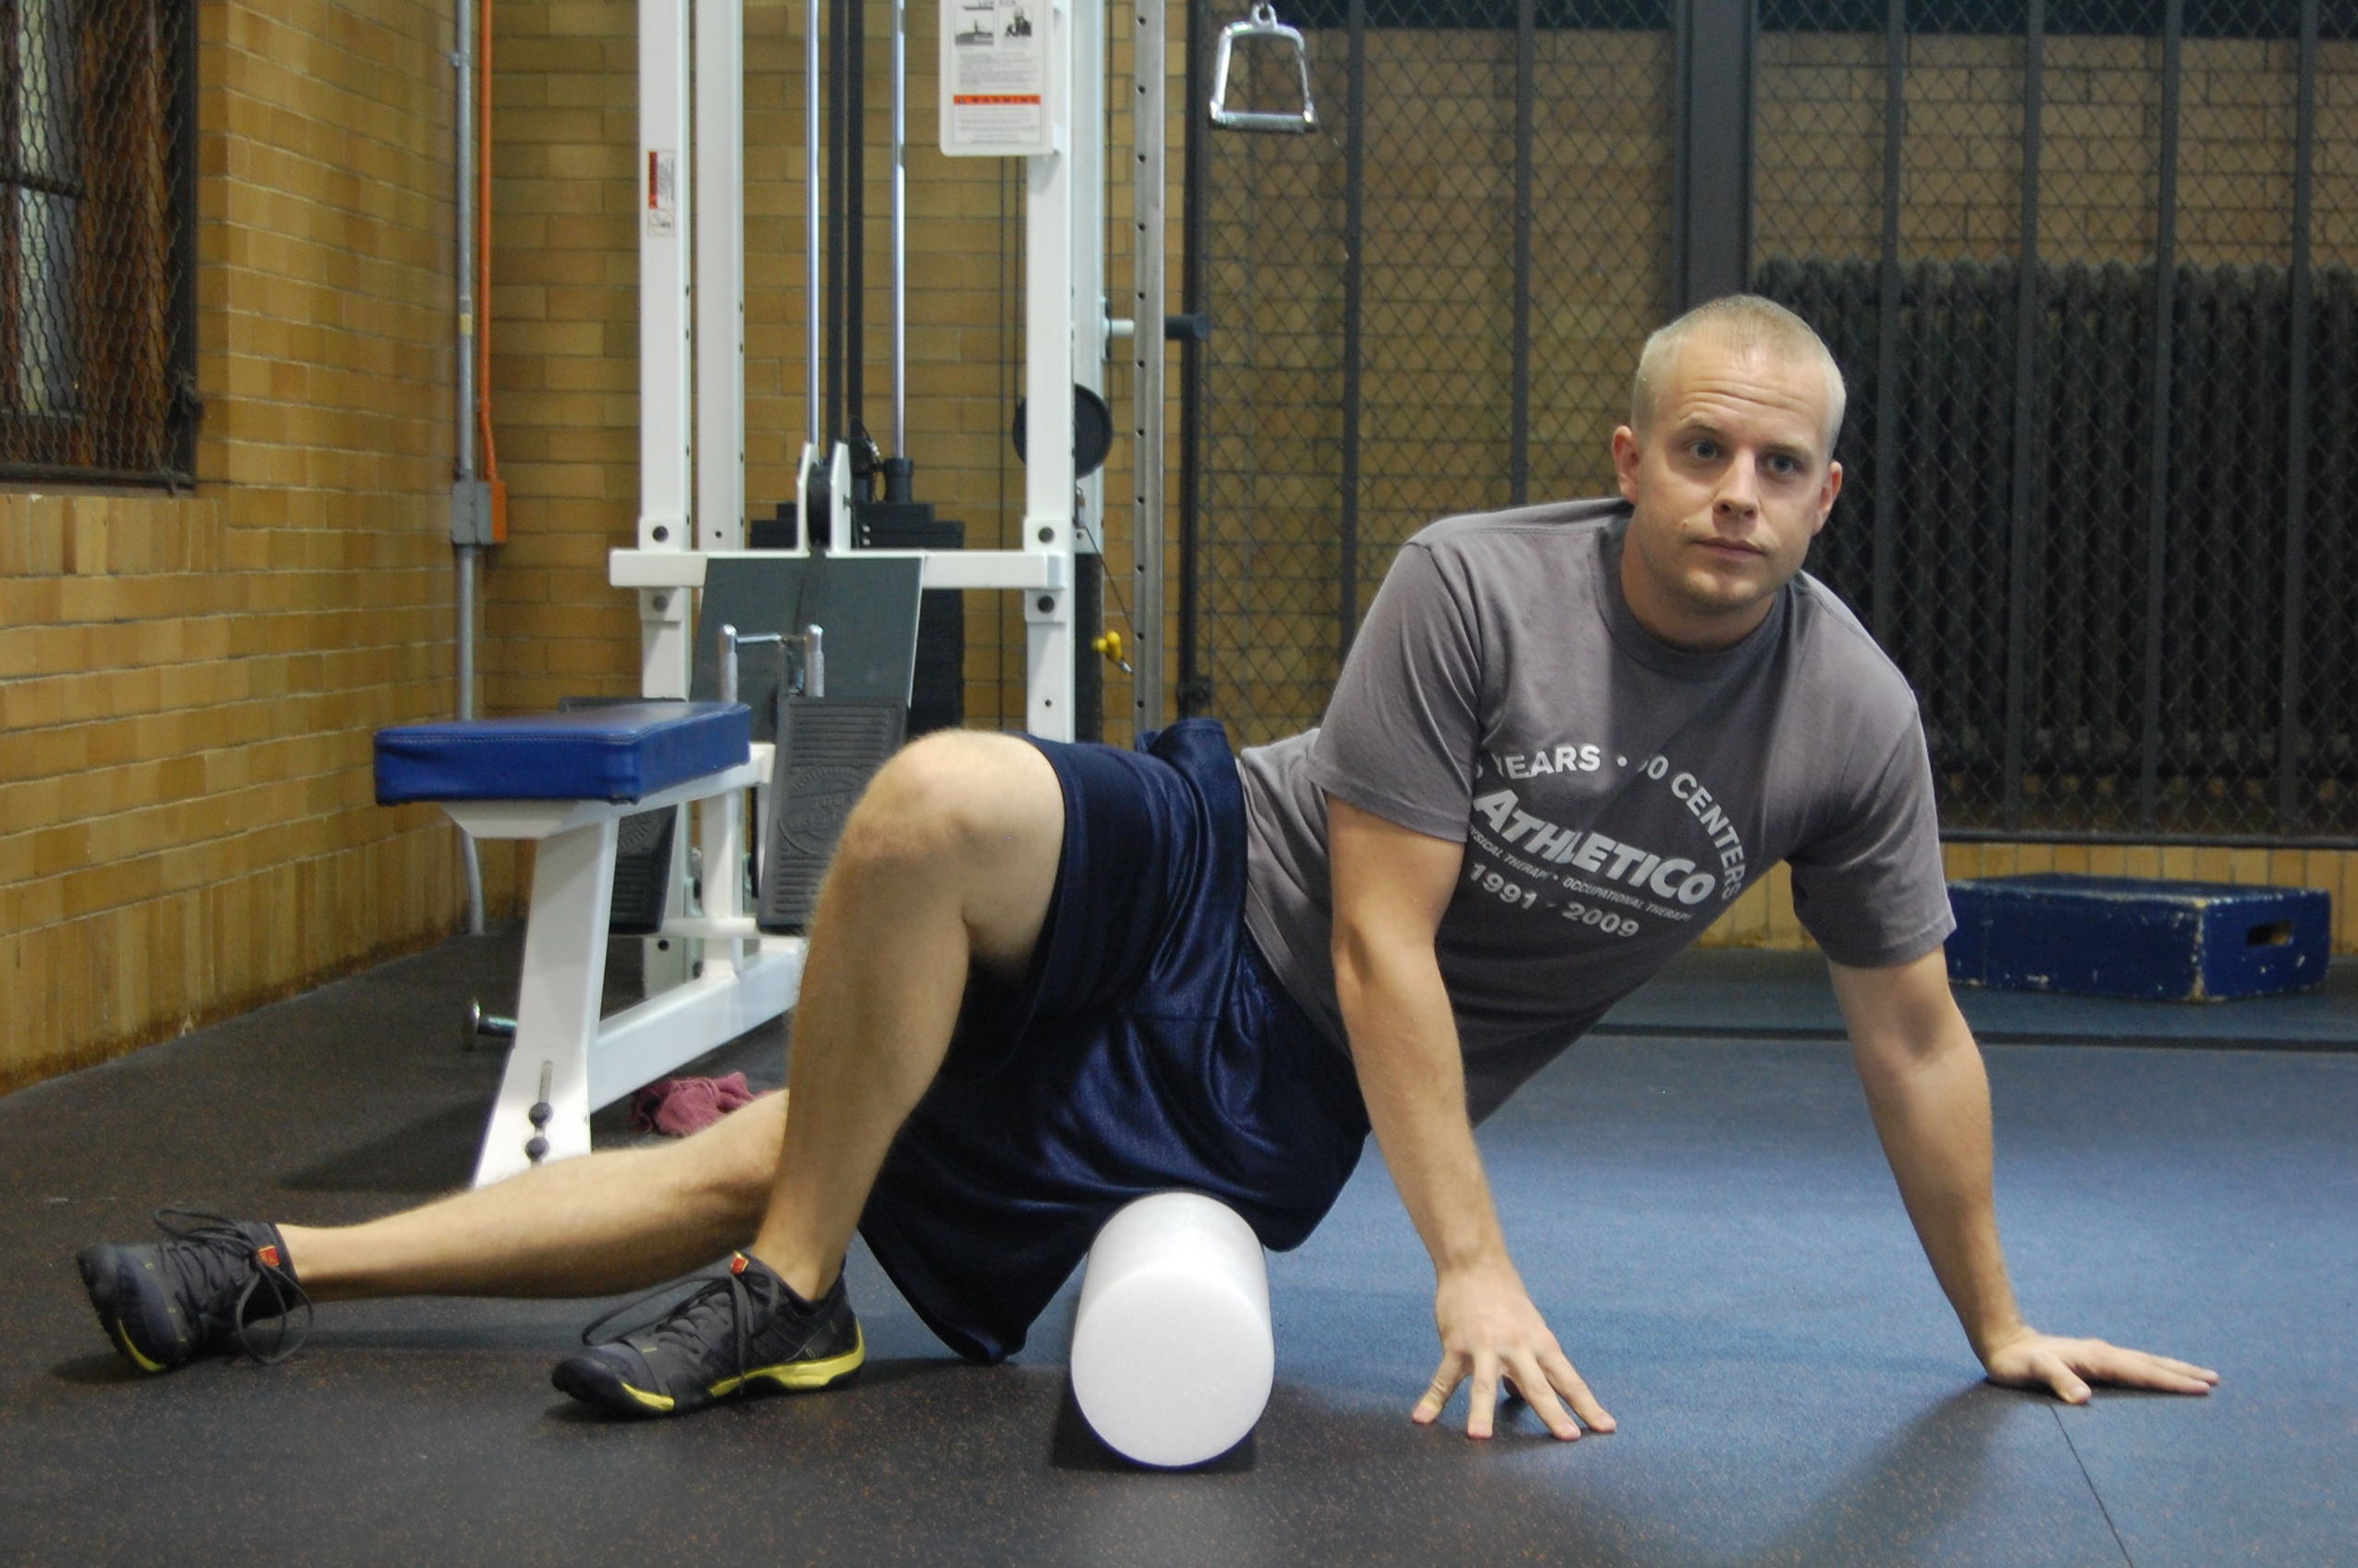 3 Ways to Use a Foam Roller - Athletico